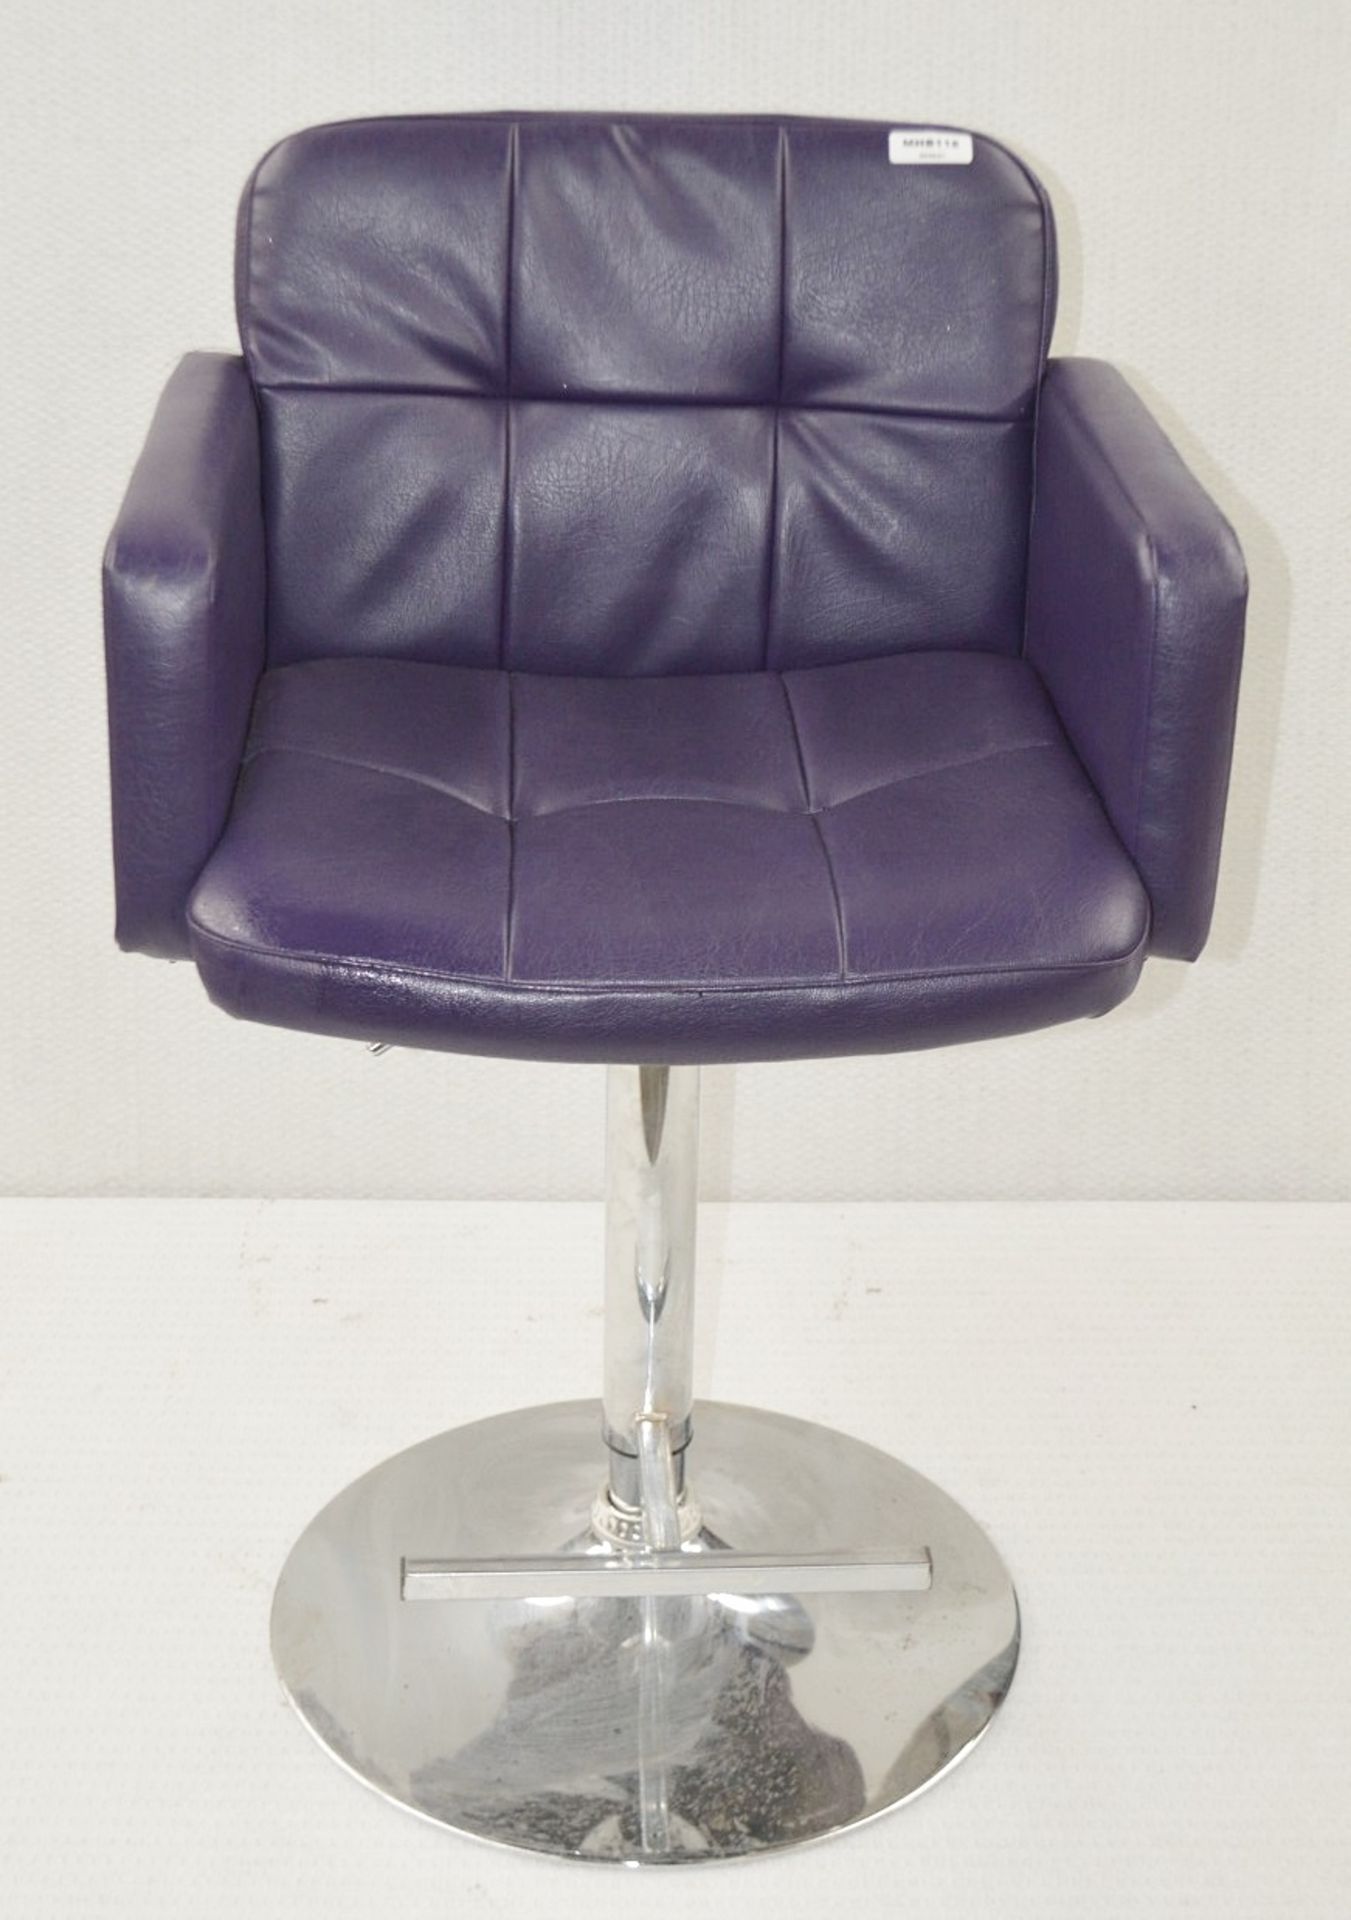 1 x URBAN DECAY Branded Gas-Lift Beauty Salon Swivel Chair With Foot Plate - Upholstered In Purple